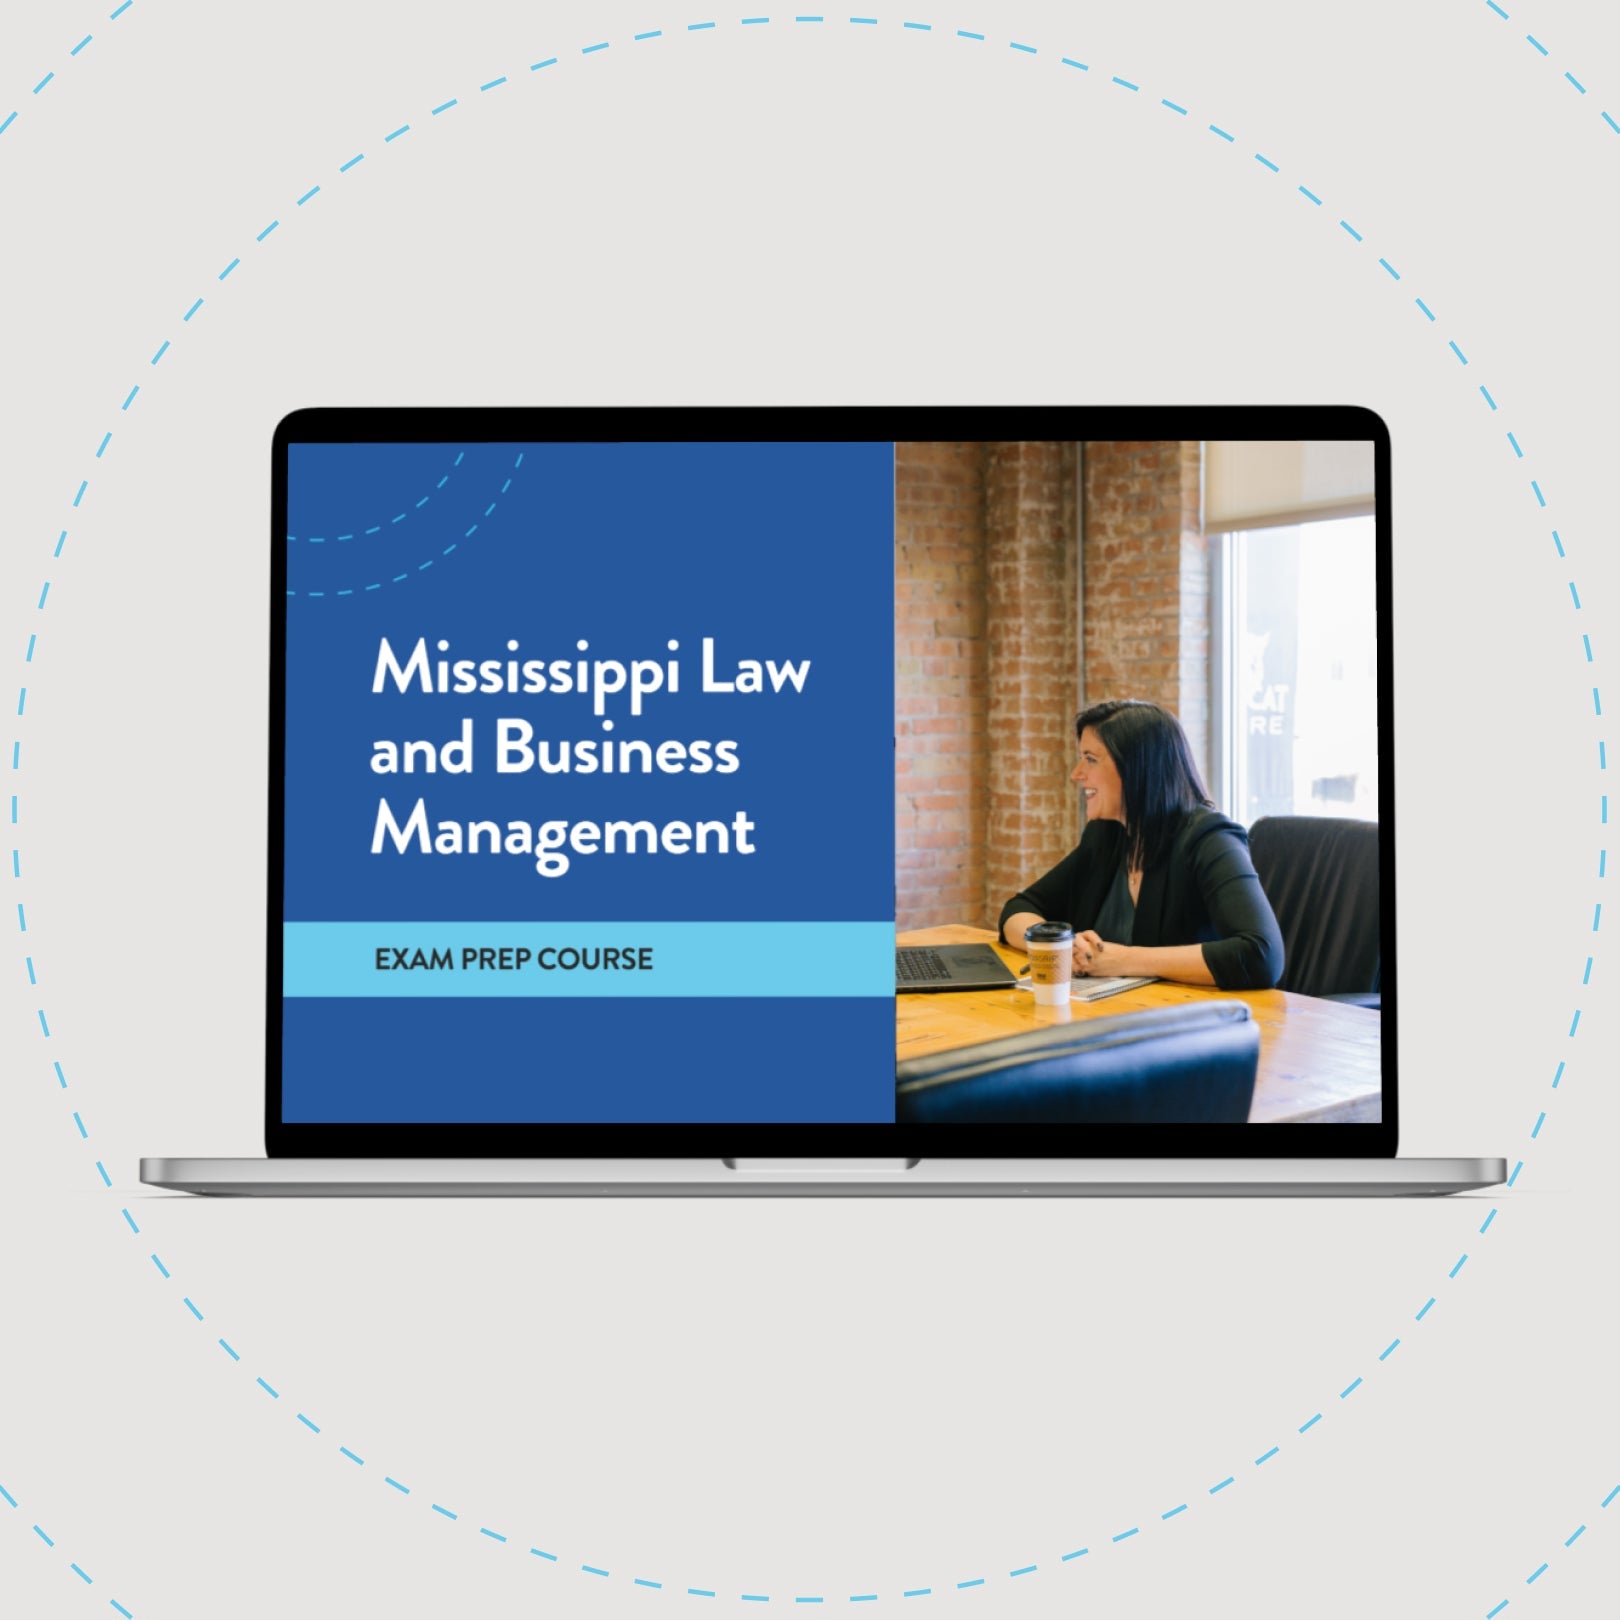 Mississippi Law and Business Management Exam Prep Course